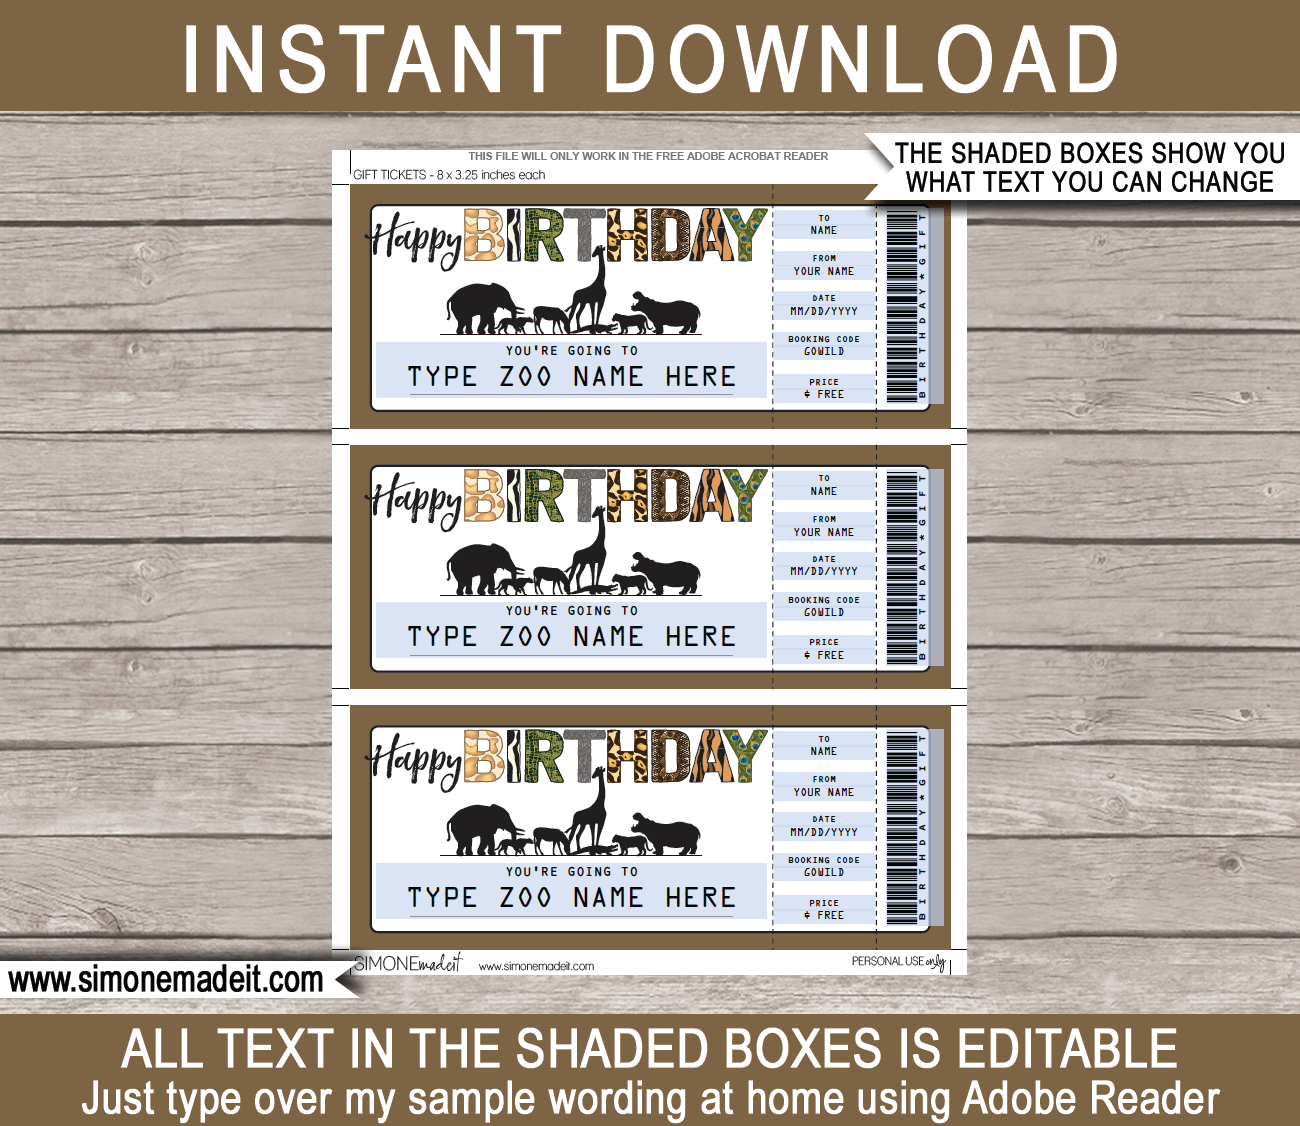 Birthday Zoo Tickets Gift Voucher Template Surprise tickets to the Zoo